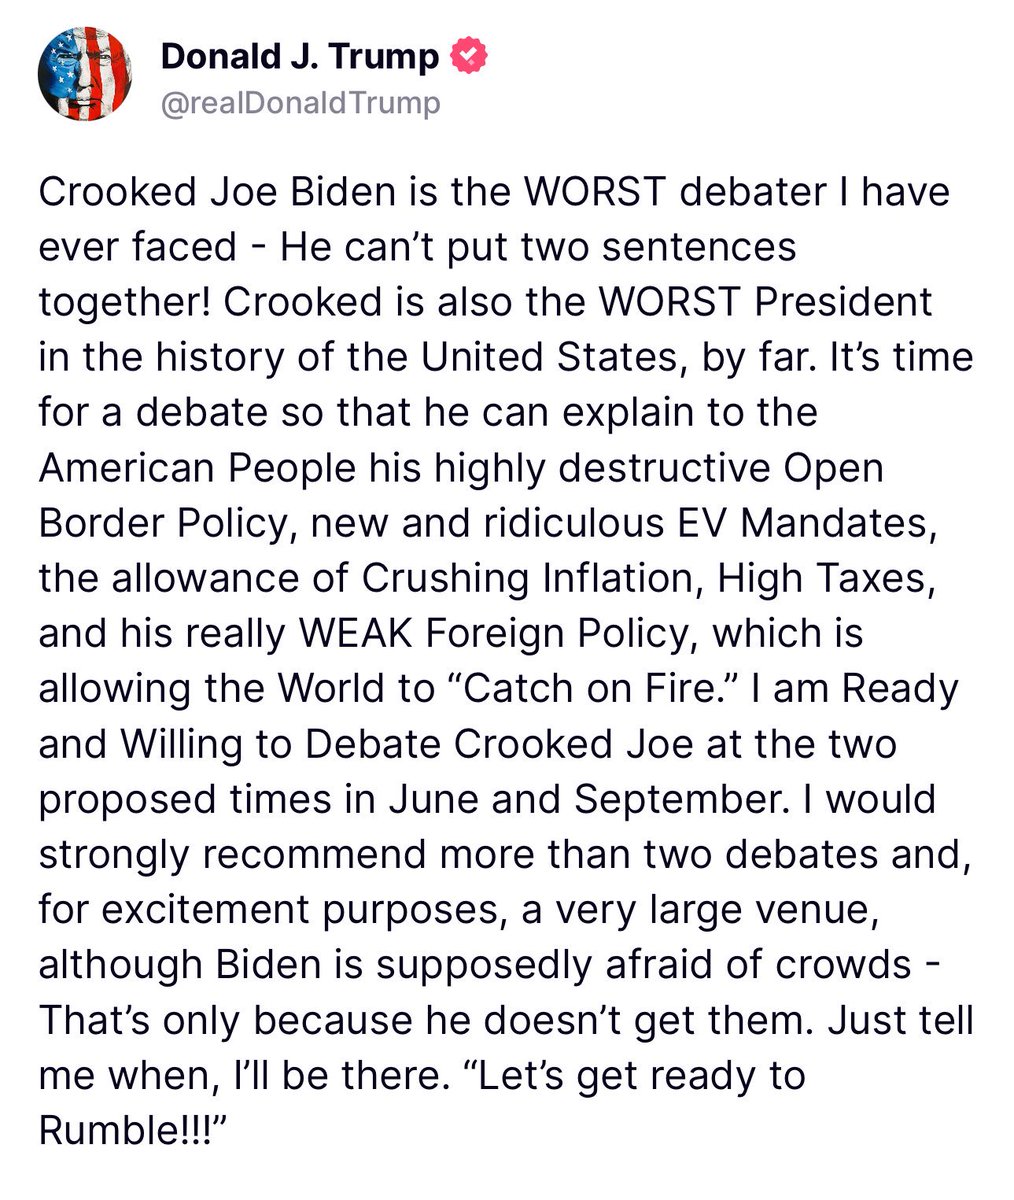 Trump and Biden will debate twice, in June and September. Devil in the specific details, but looks like debates will happen.